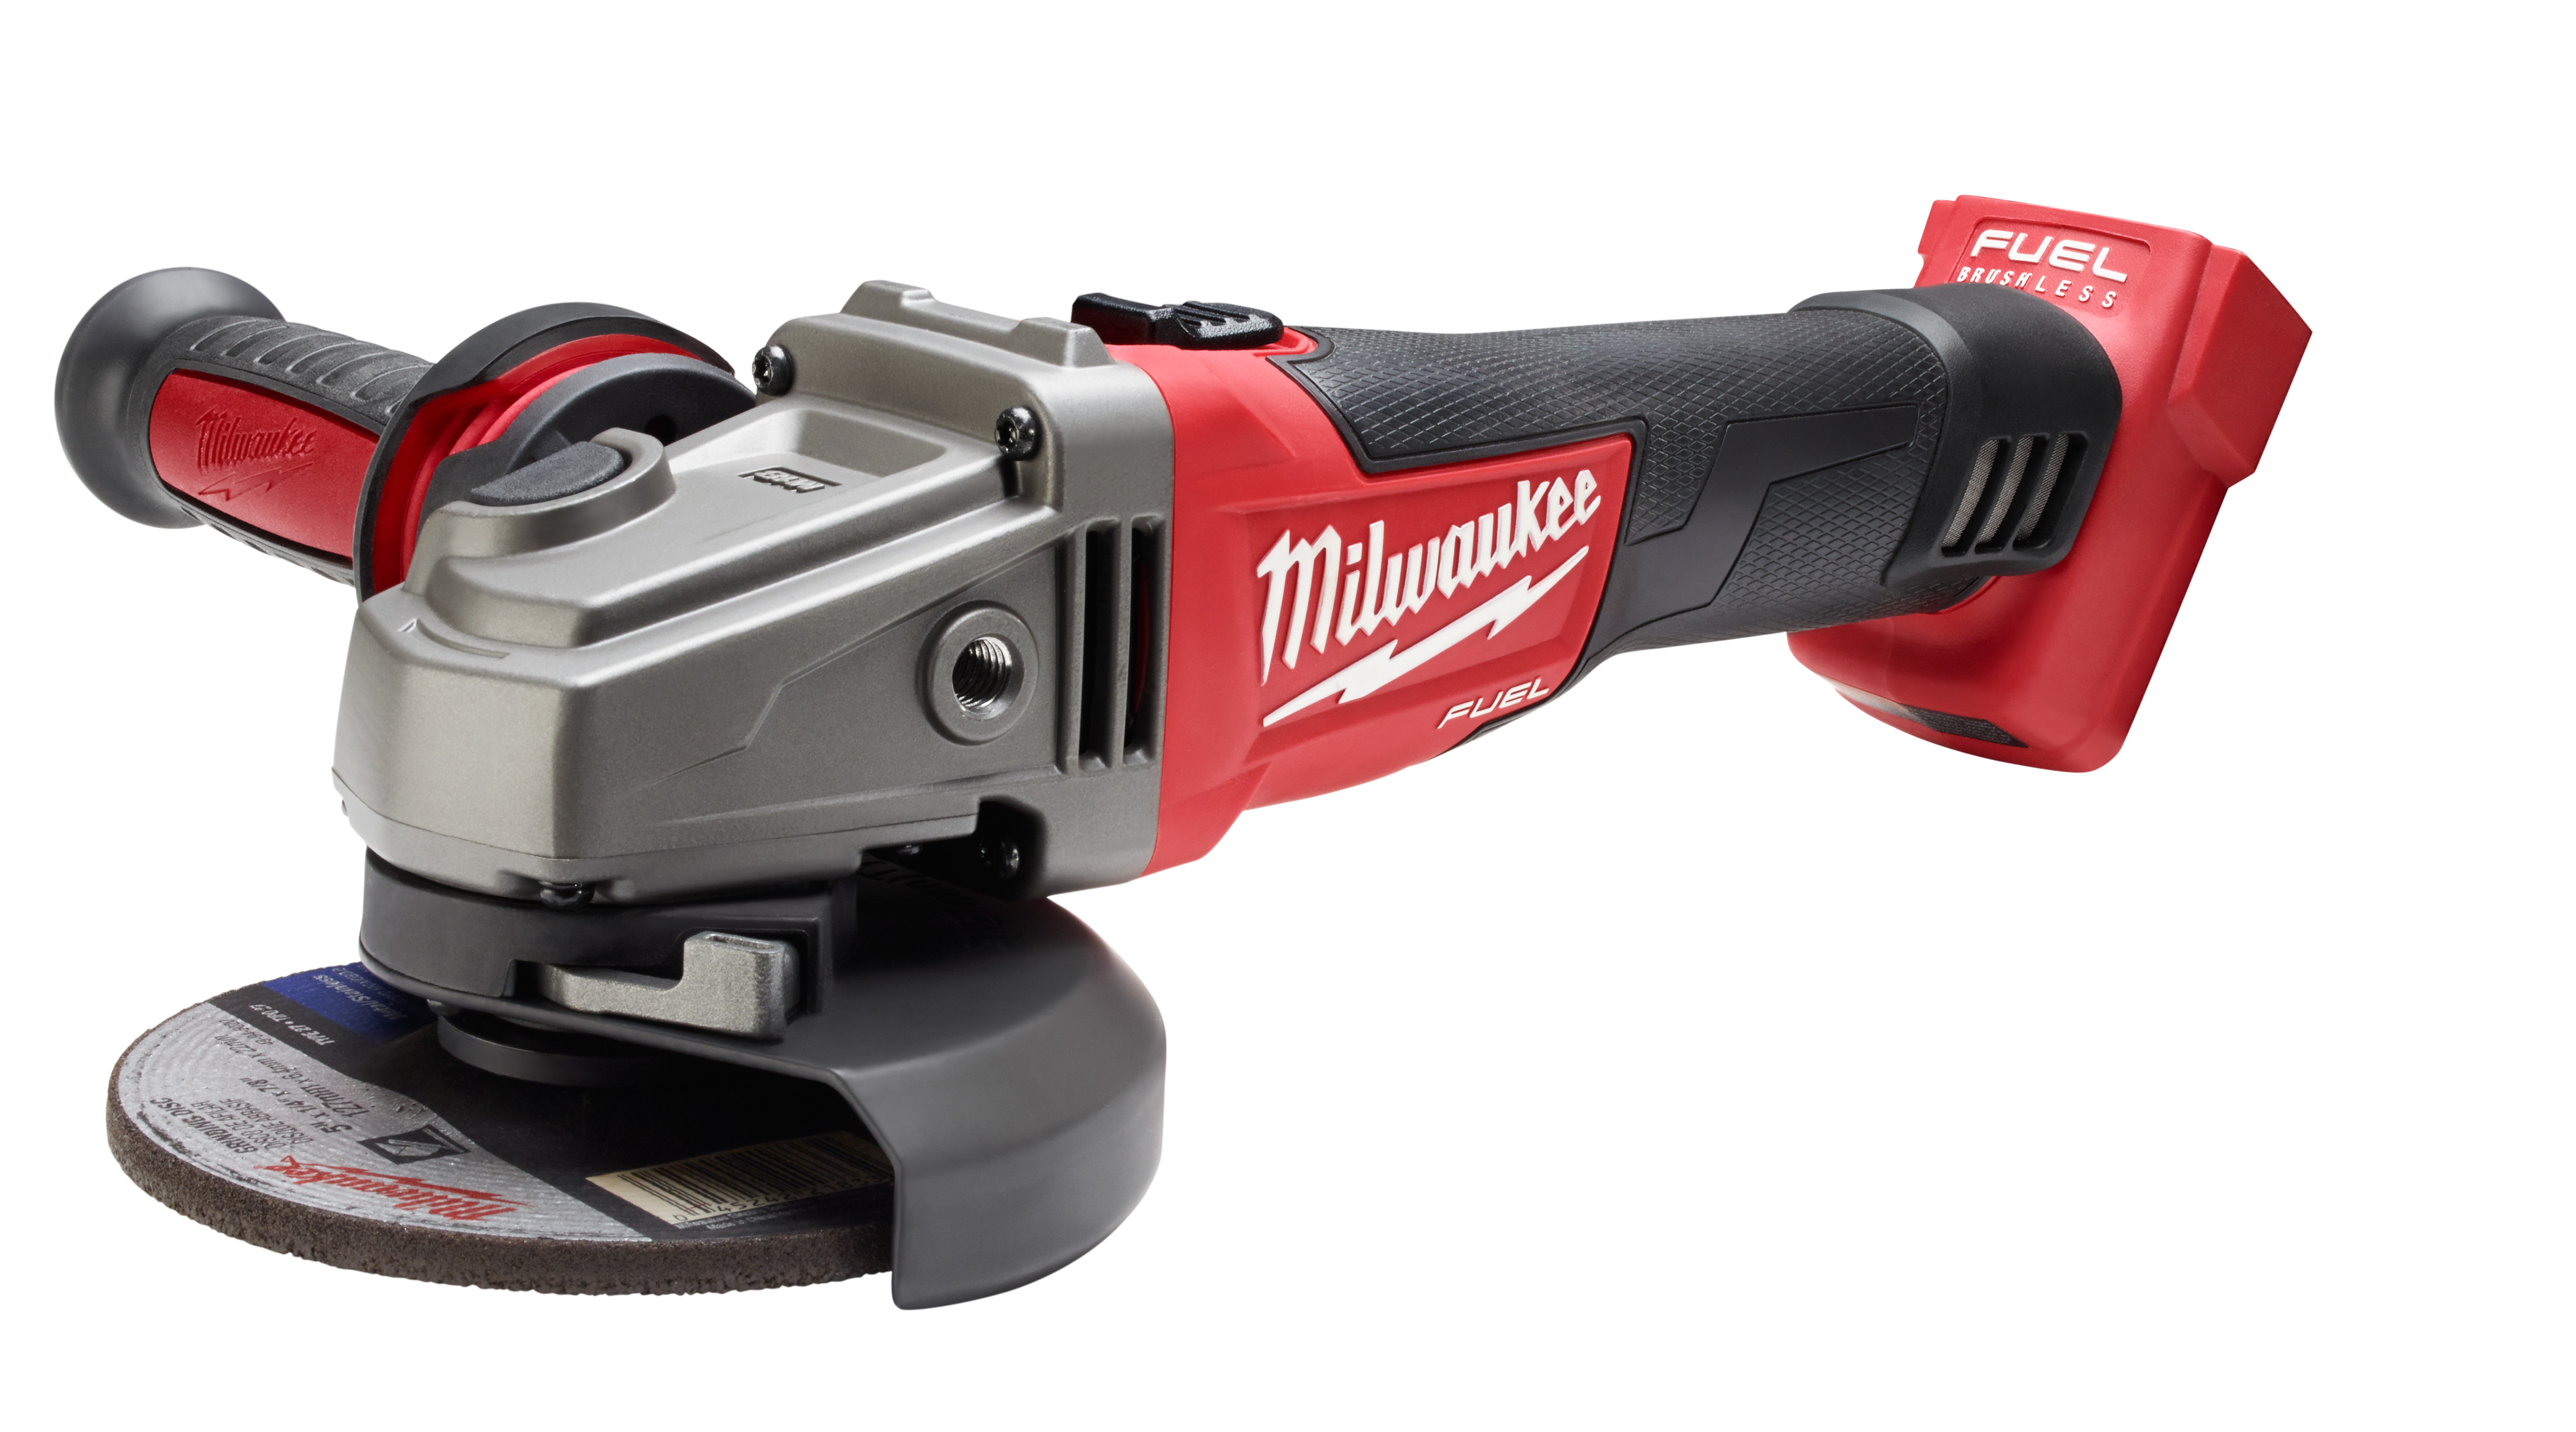 The world’s first cordless grinder delivers the power of a corded grinder with up to 2X more run time and up to 10X longer motor life. The M18 FUEL™ 4-1/2